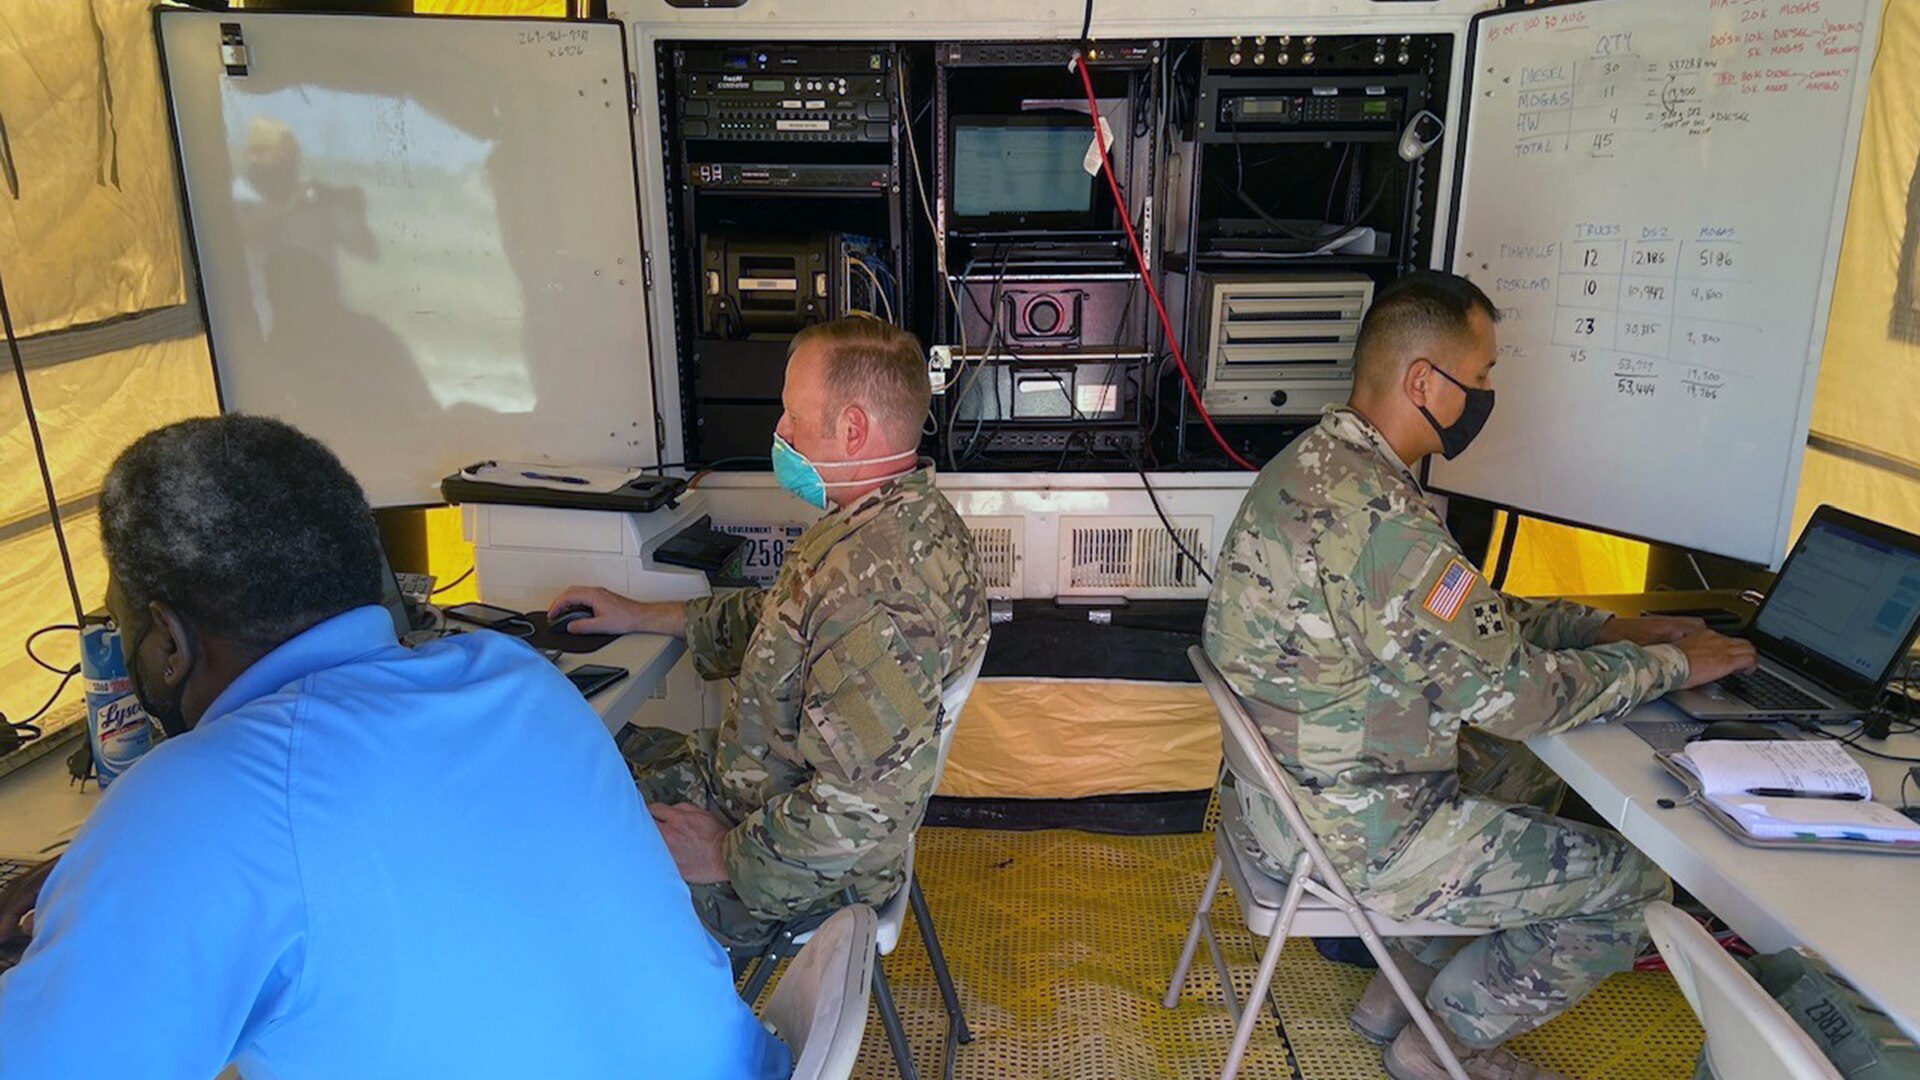 Three men, two in green camo uniforms, sit in a small room with computer equipment.